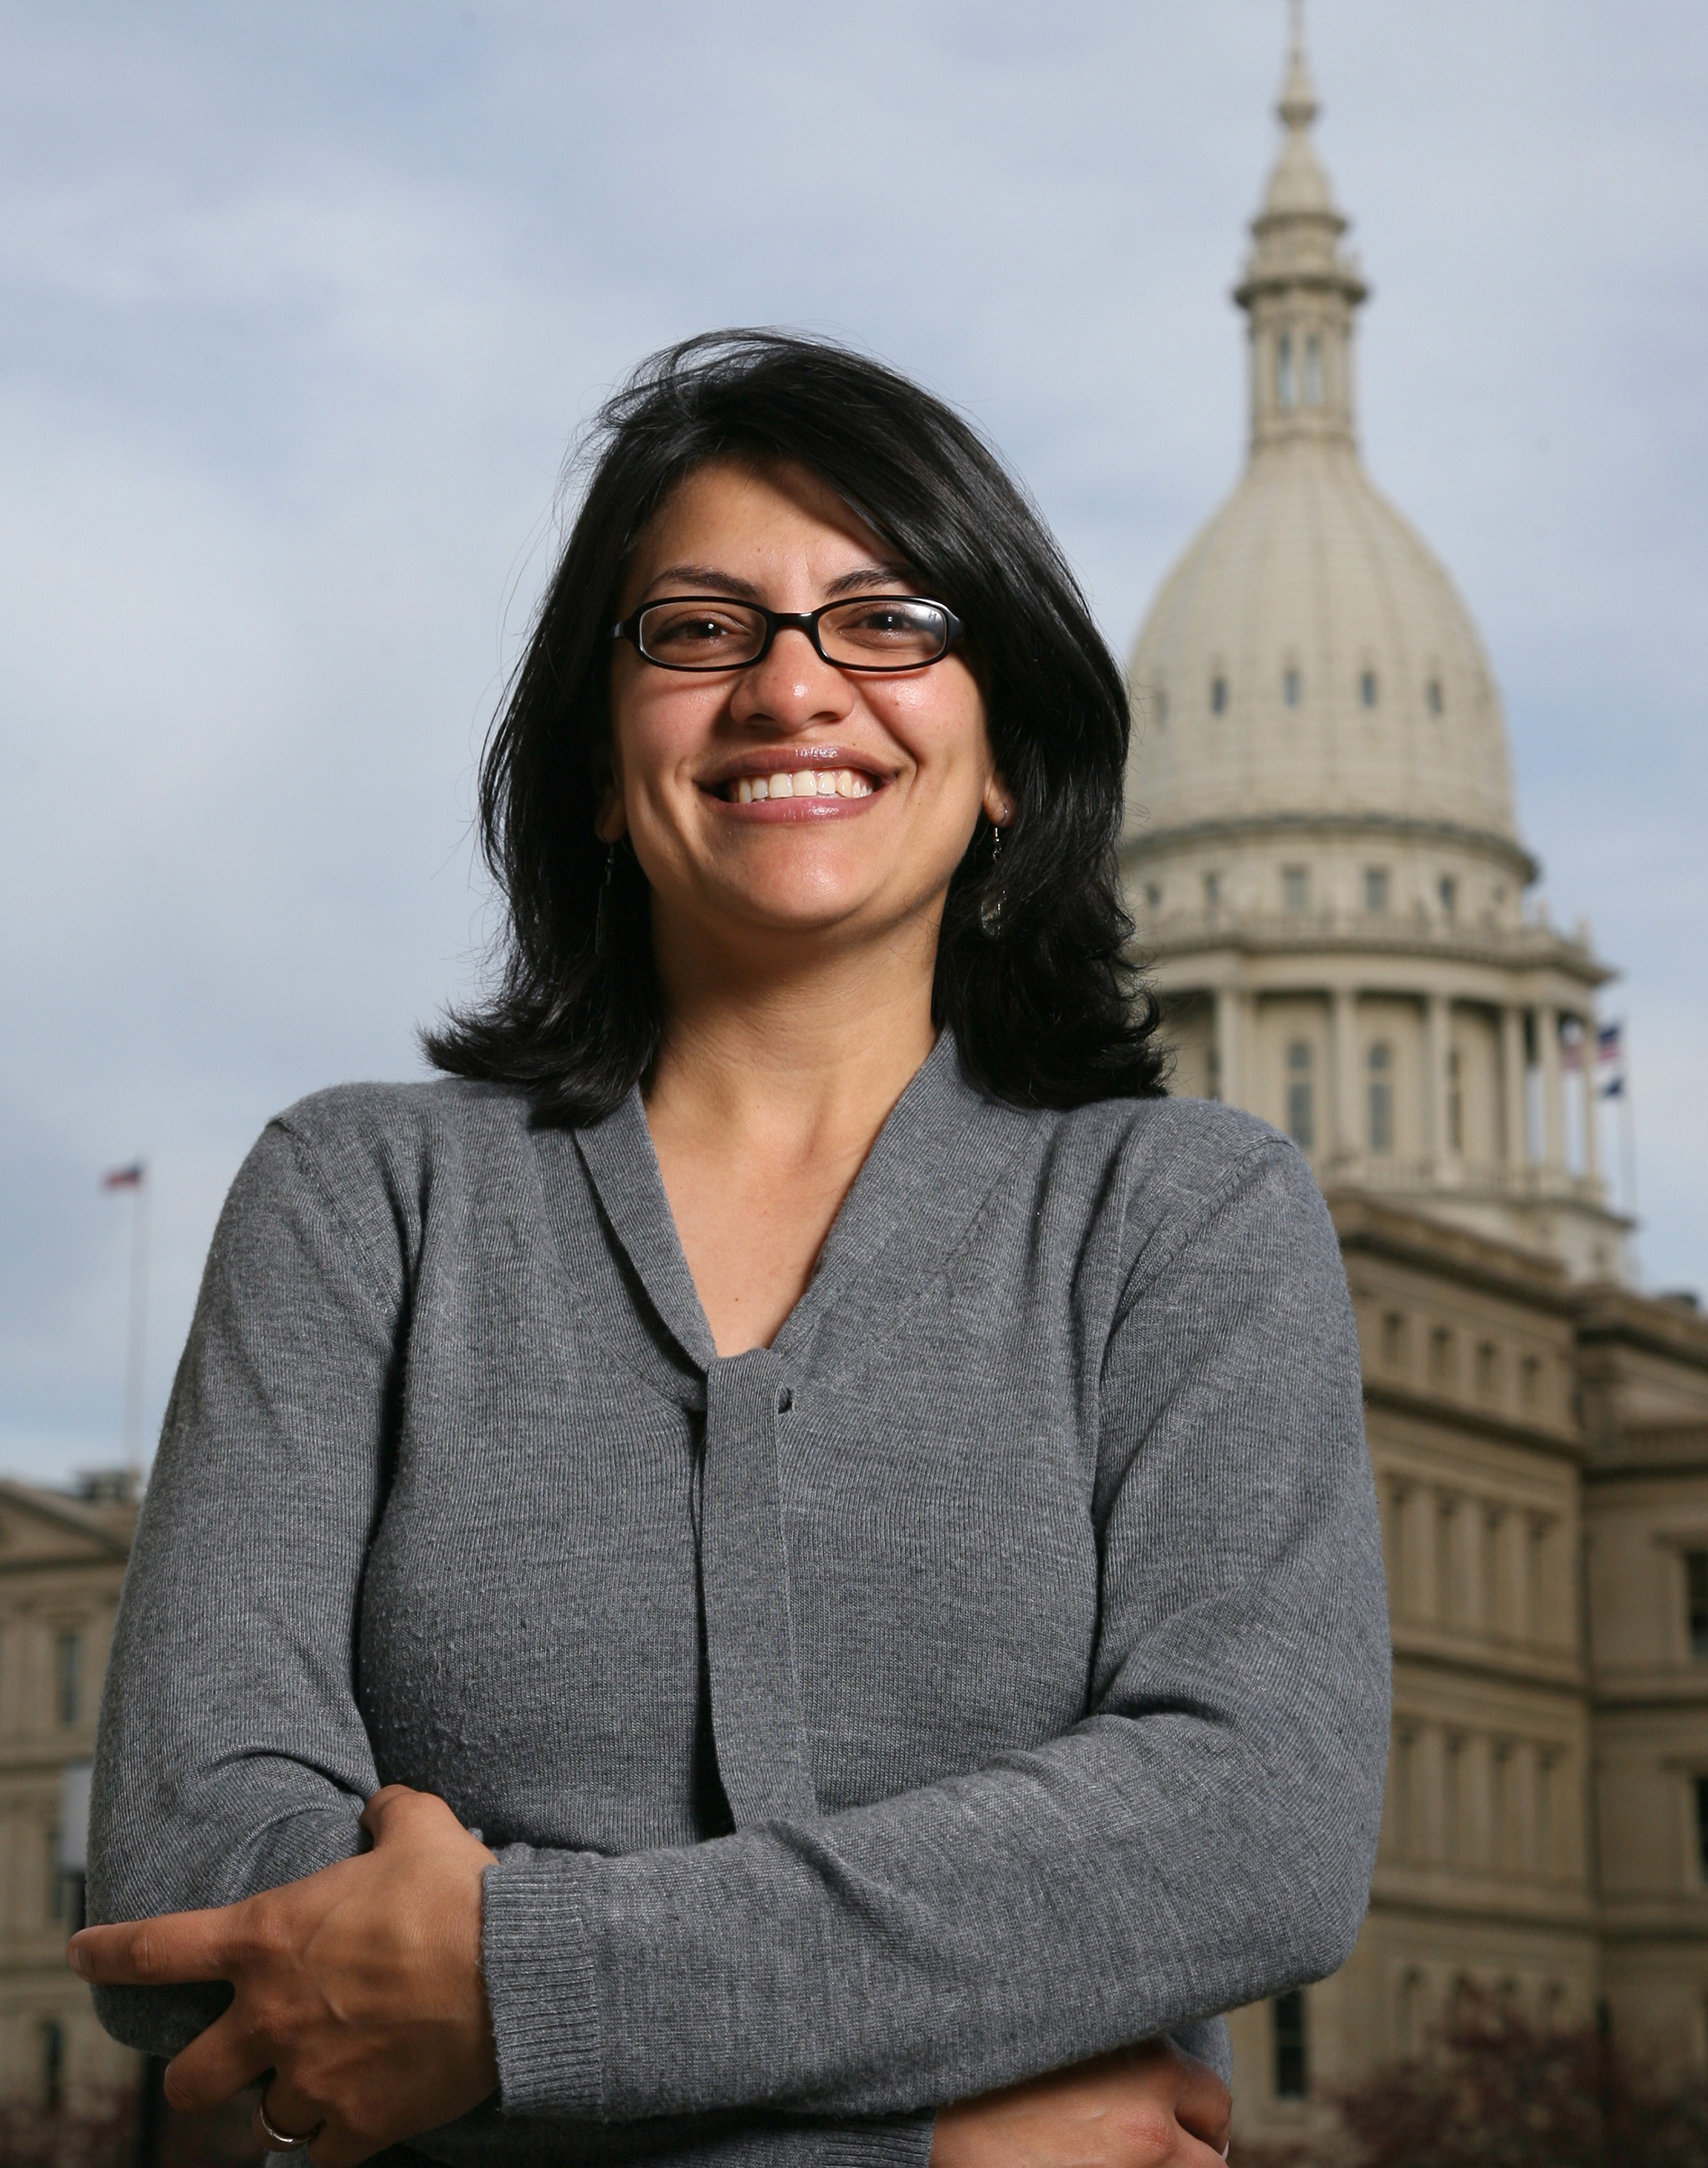 Rashida Tlaib is shown in front of the Michigan Capitol after her election as the first Muslim woman to serve in the state House. (Al Goldis—AP/Shutterstock)